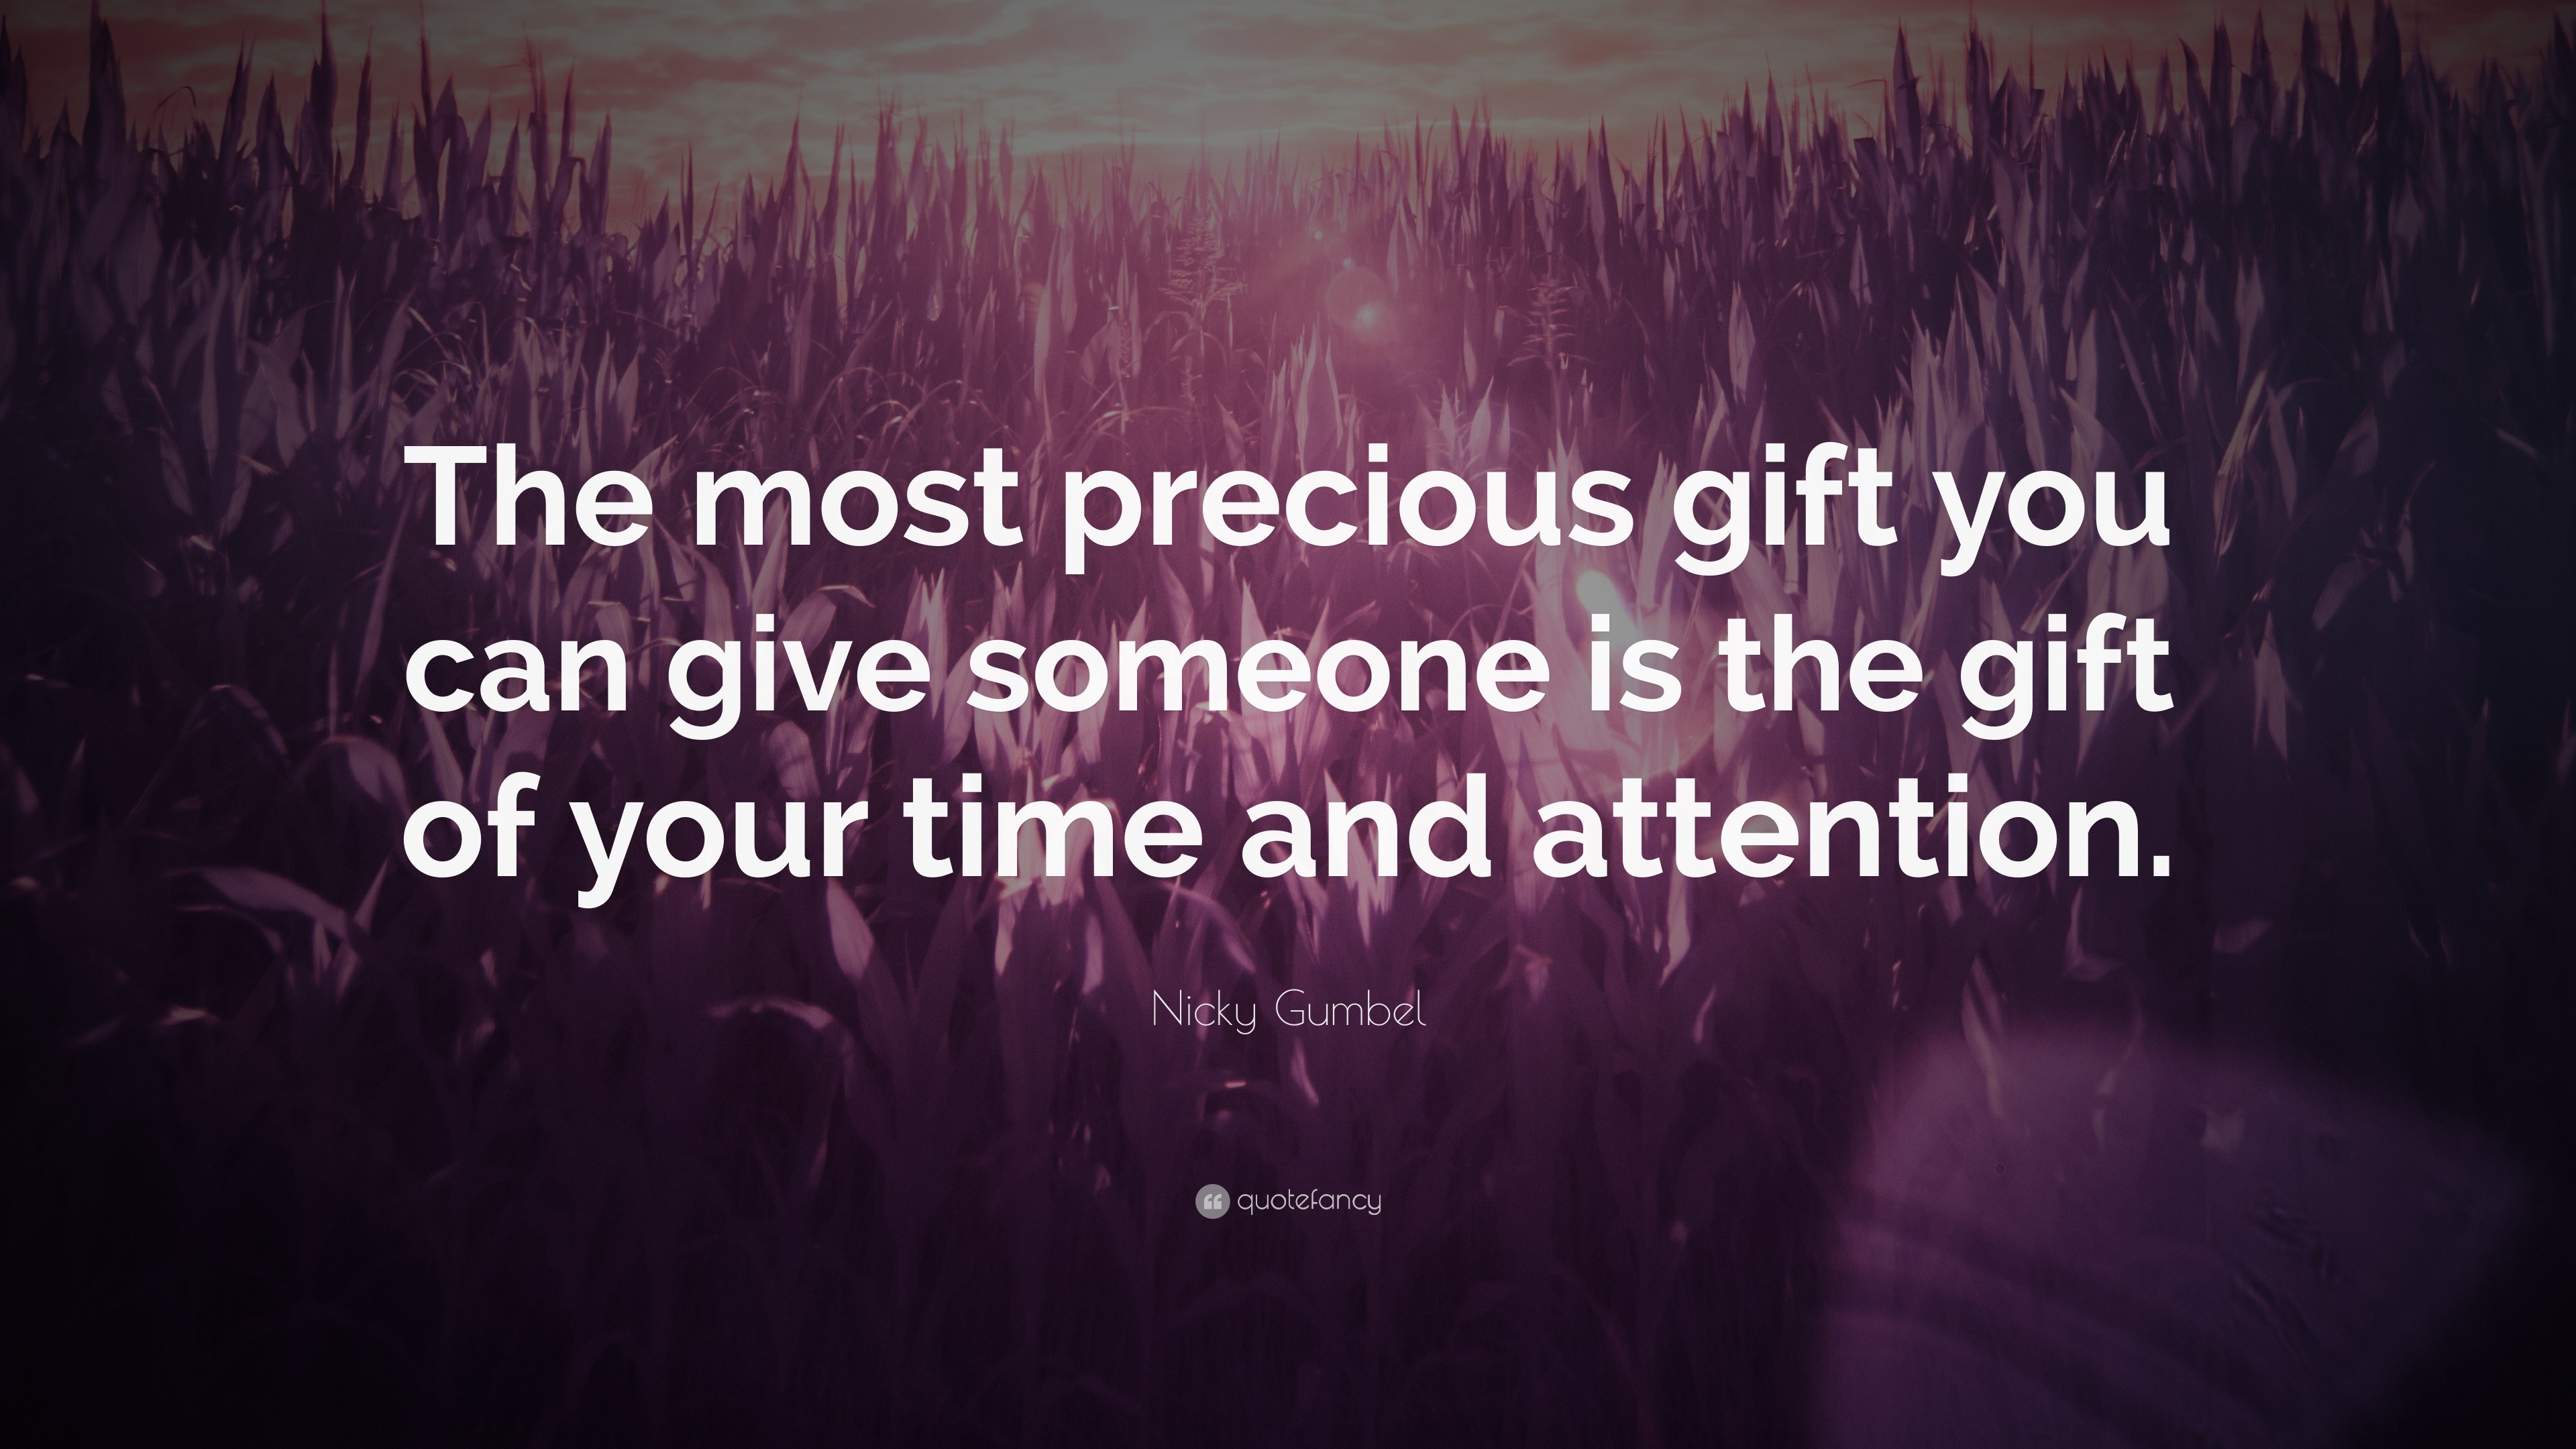 Nicky Gumbel Quote: "The most precious gift you can give someone is the gift of your time and ...